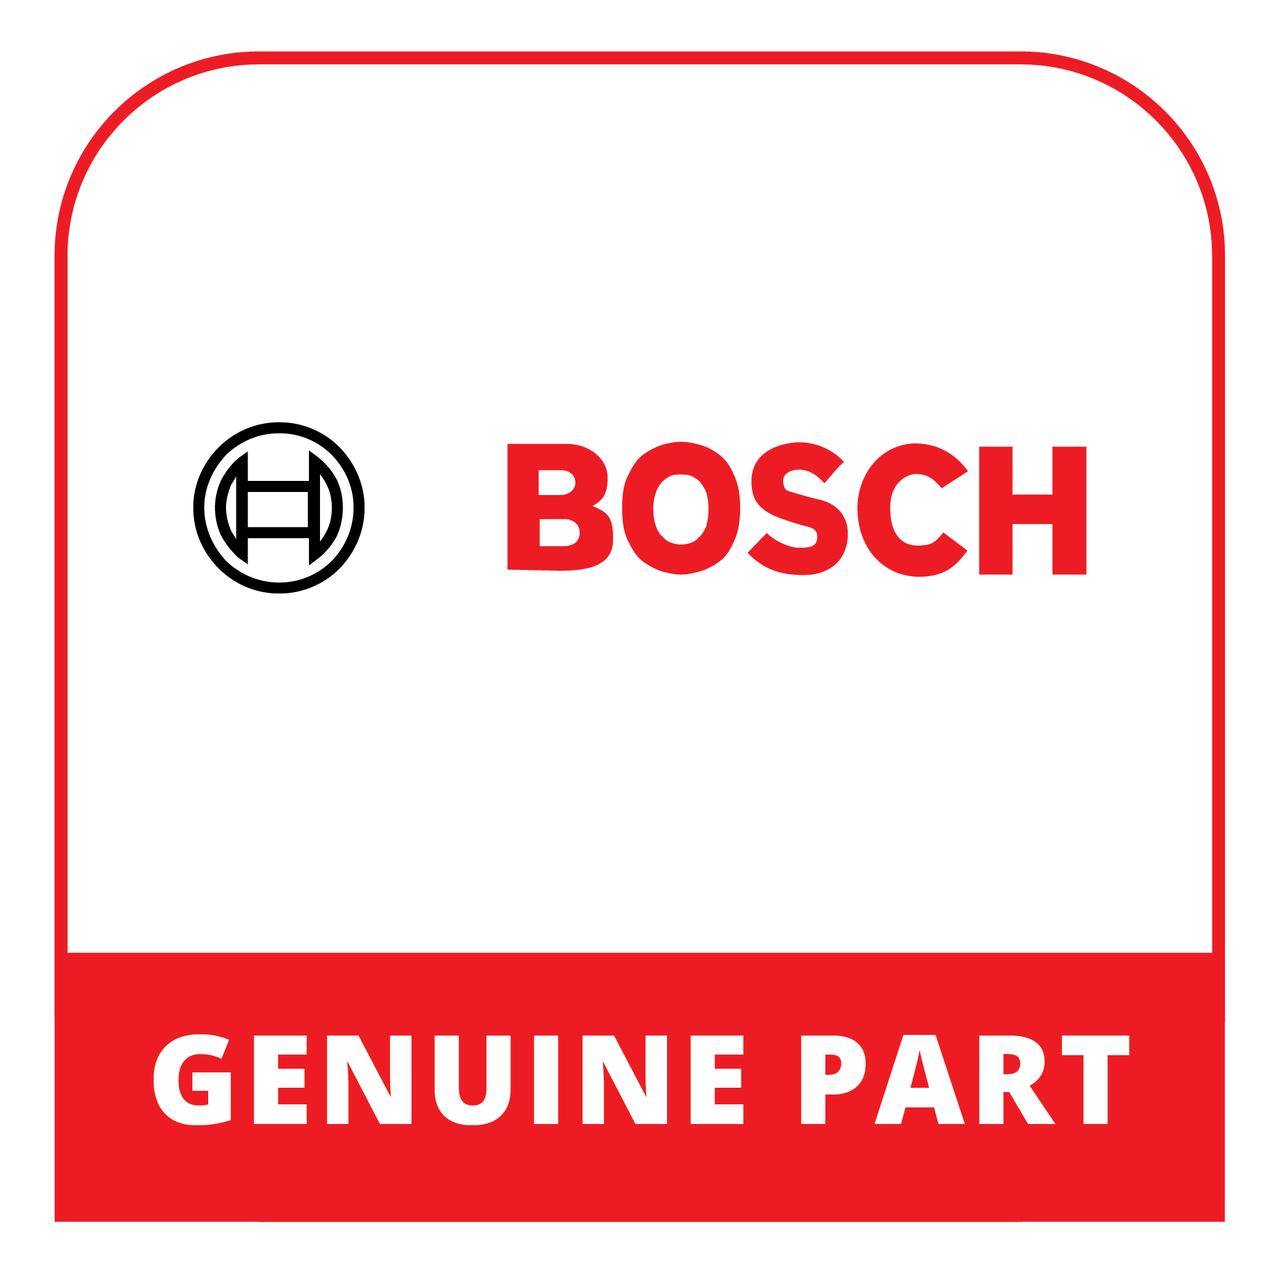 Bosch (Thermador) 20000755 - Frame - Genuine Bosch (Thermador) Part